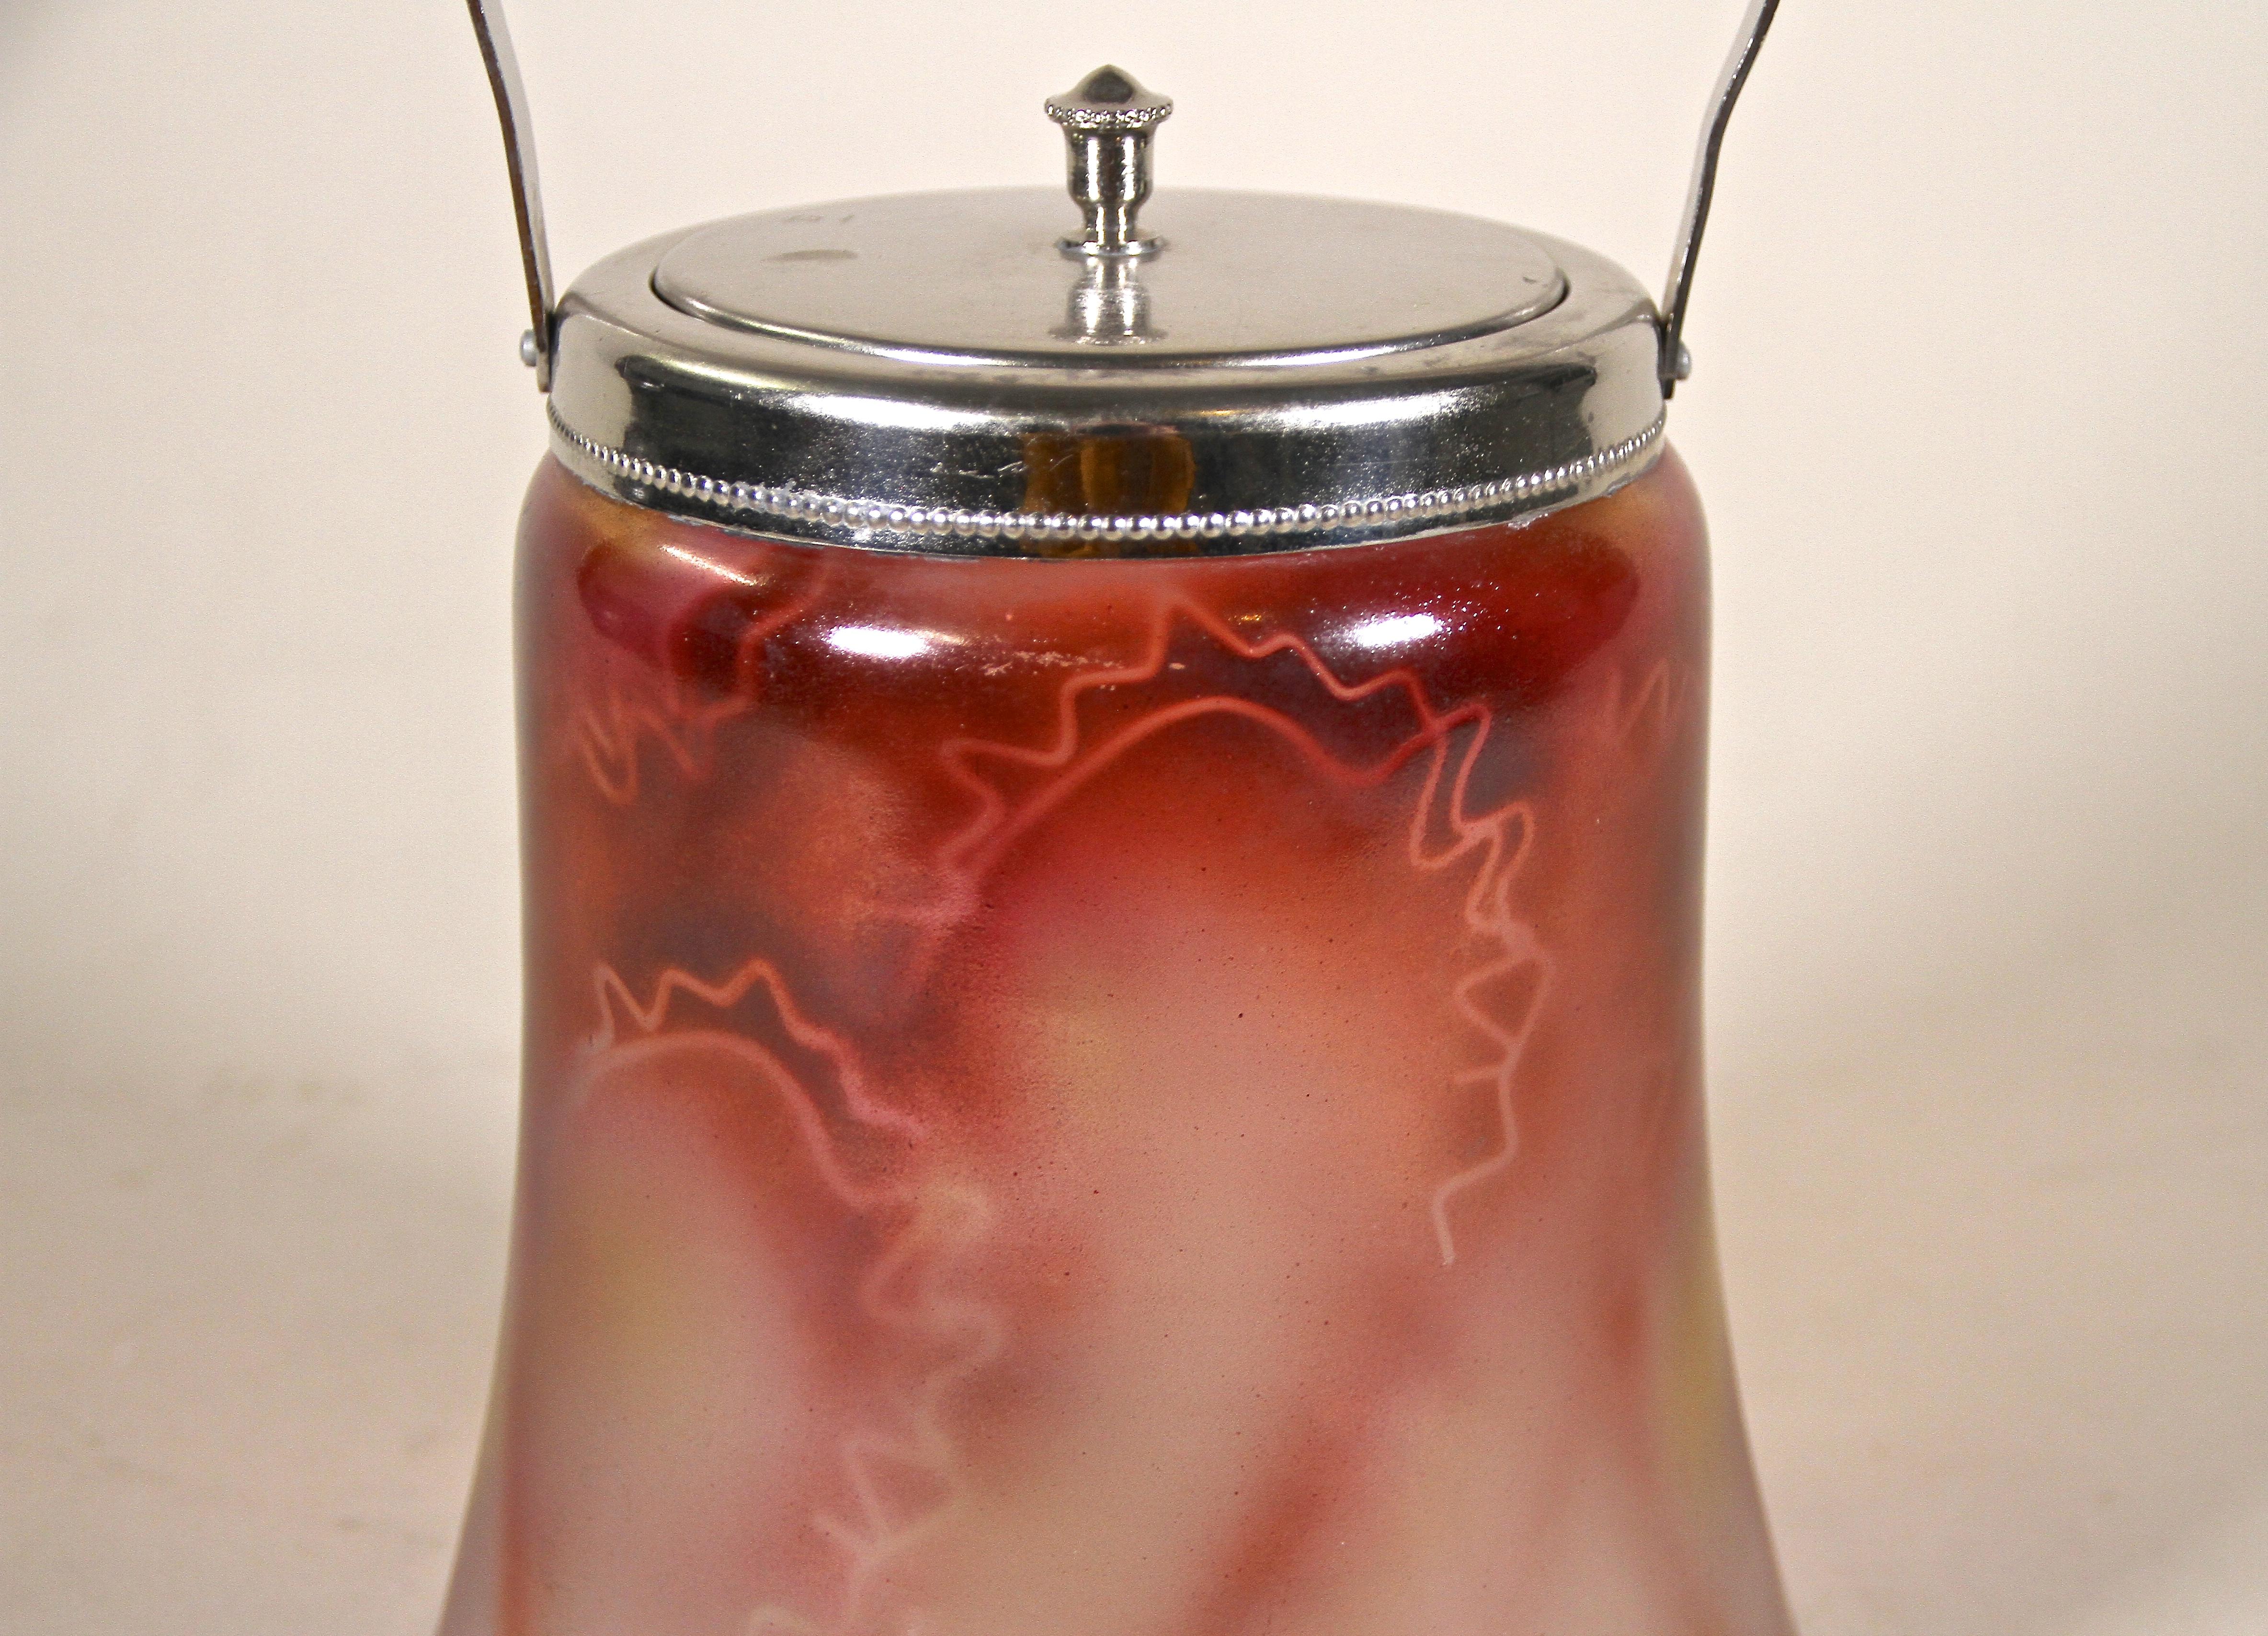 Unusual Bohemian glass Jar with lid from the Art Deco period in the Czech Republic around 1920. This beautiful shaped glass jar with handle comes with a removable lid and shows an extraordinary design with a coloration in red and yellow tones. This